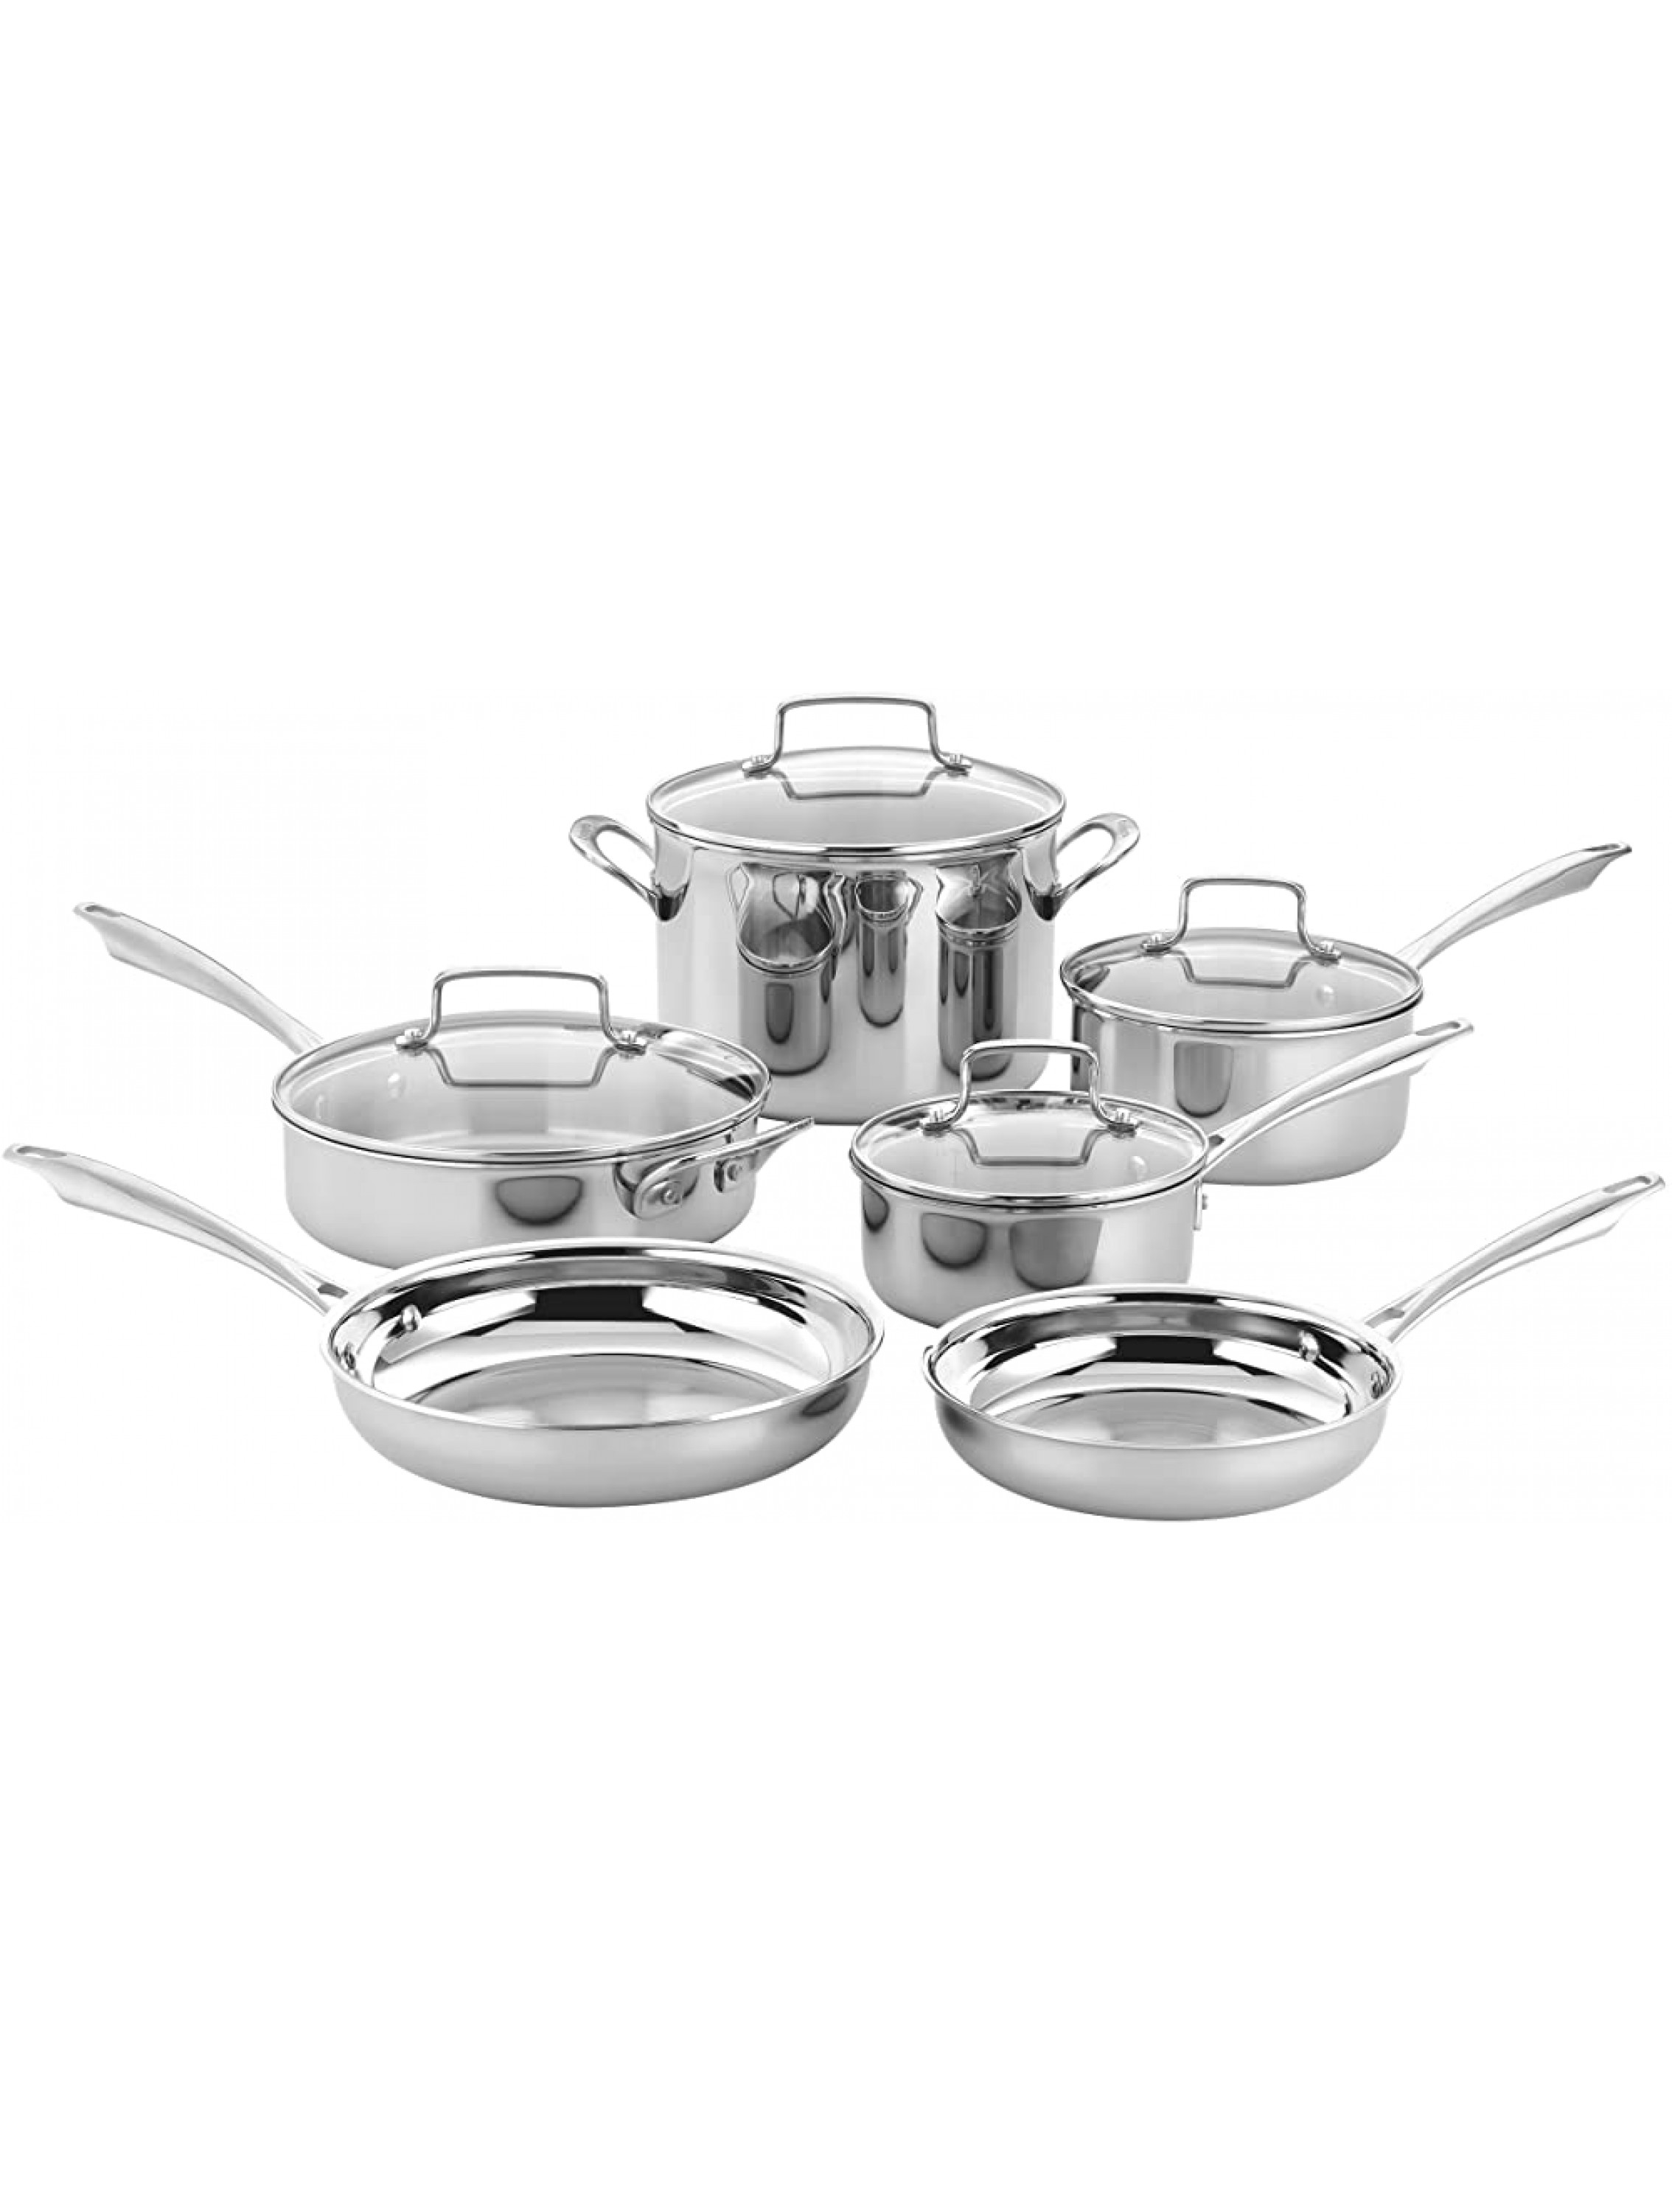 Cuisinart TPS-10 Tri-ply Stainless Steel 10-Piece Classic Cookware Set PC - BW18SOP09